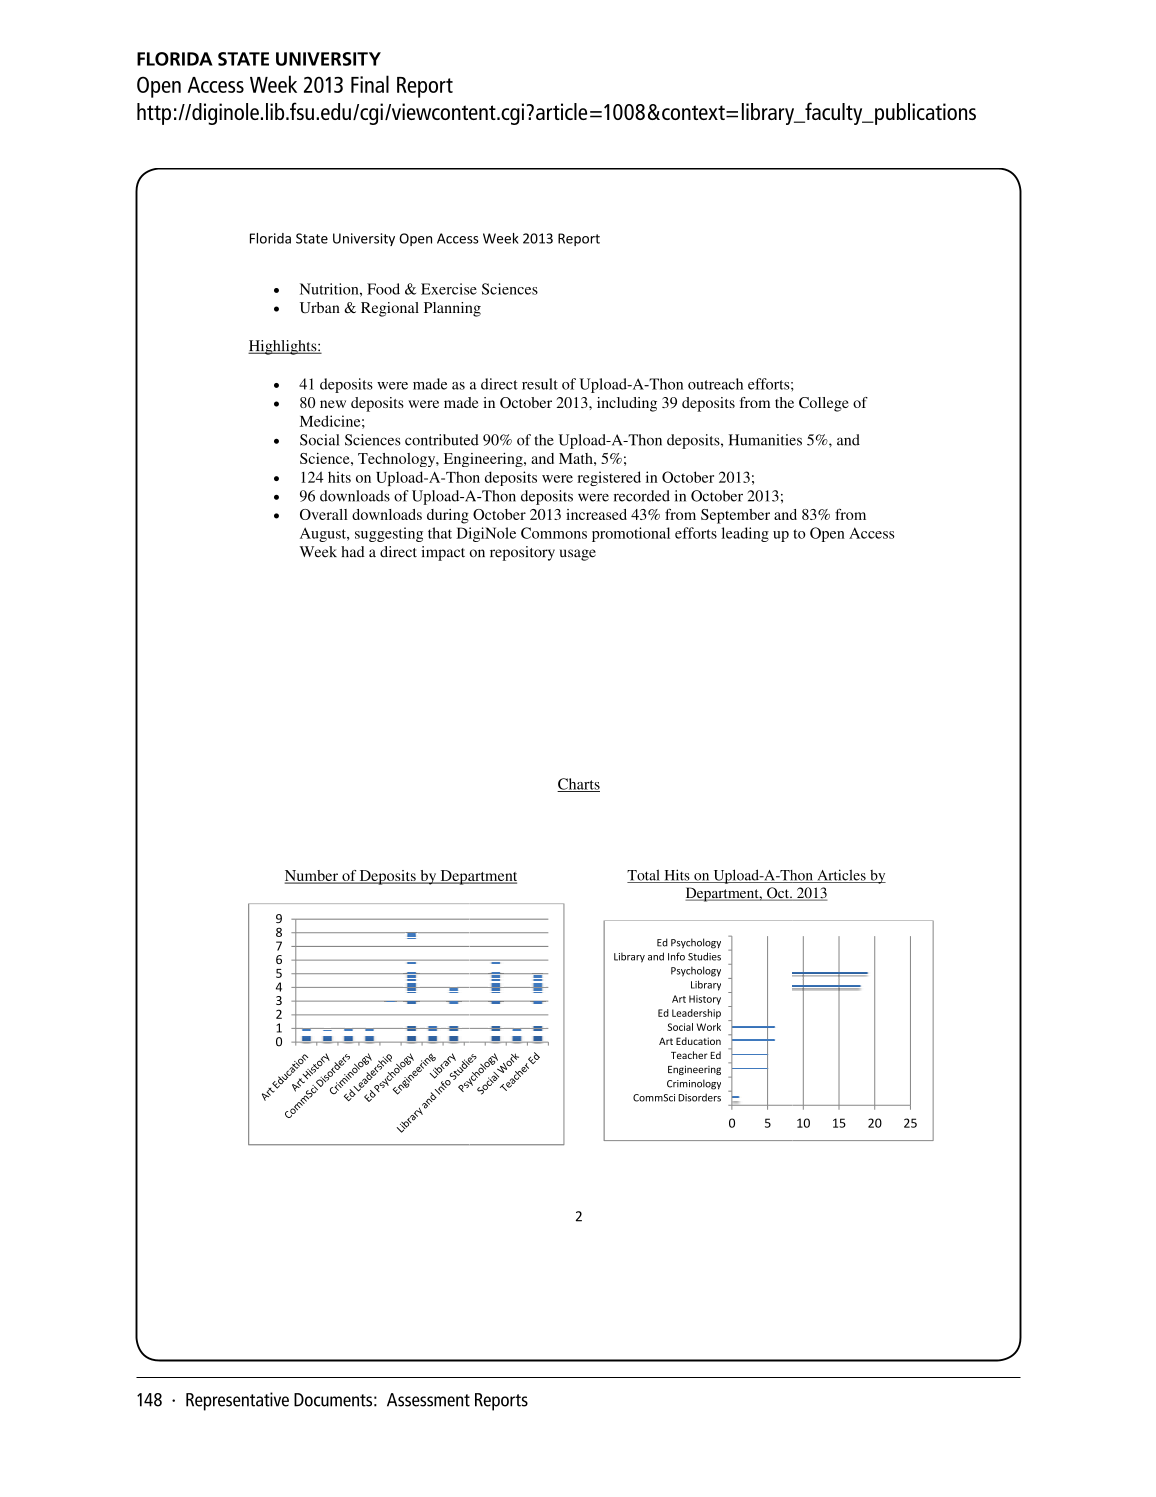 SPEC Kit 346: Scholarly Output Assessment Activities (May 2015) page 148